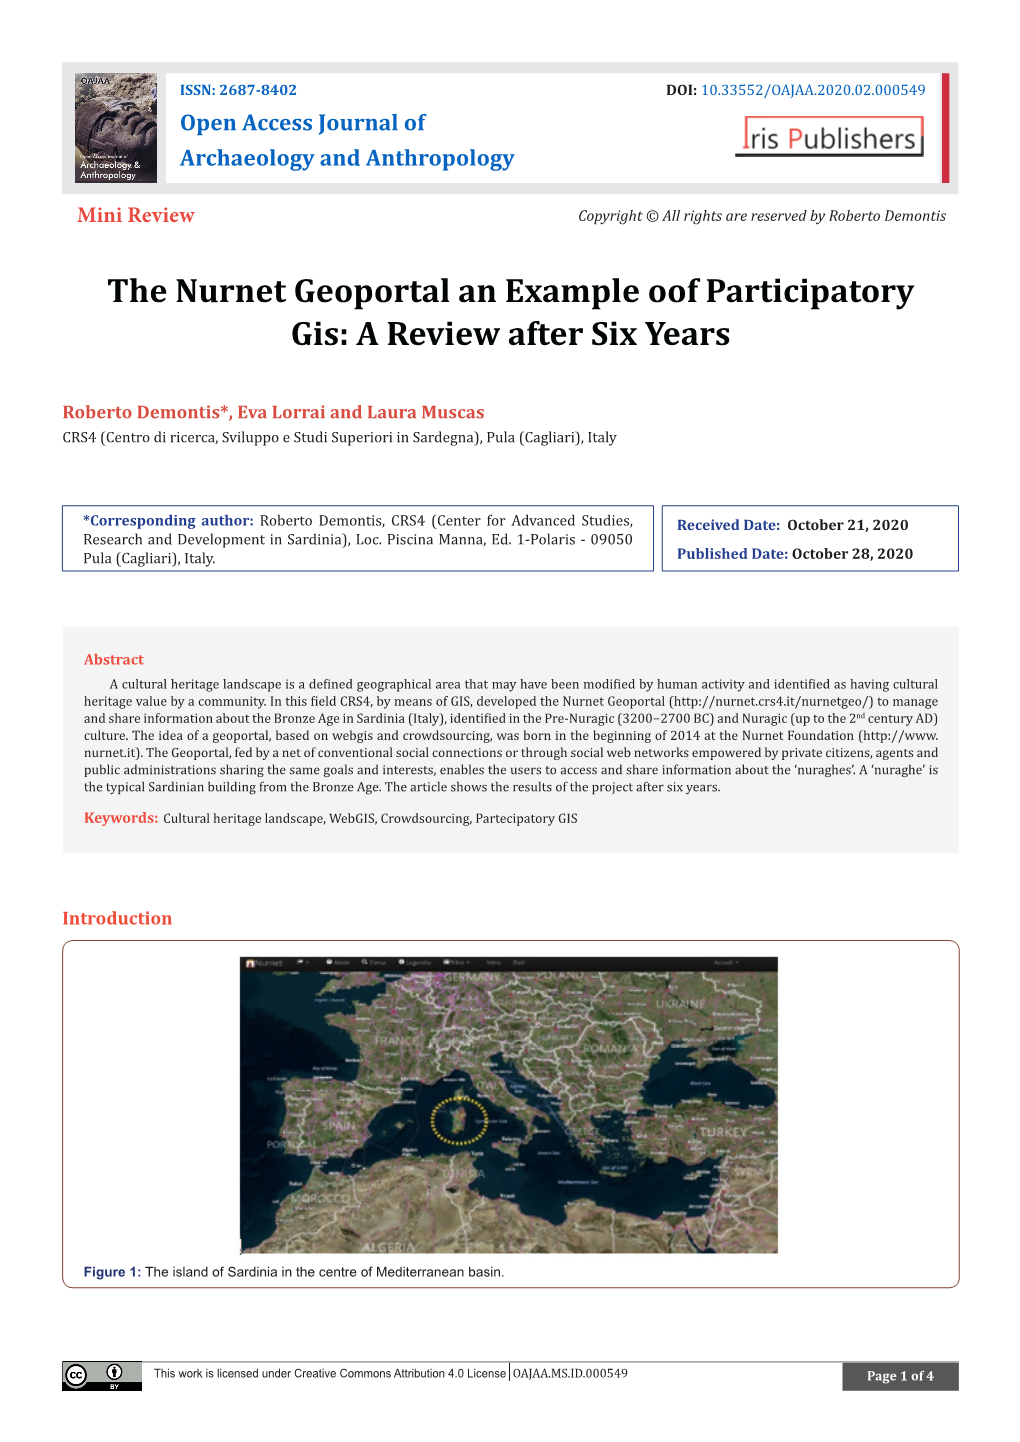 The Nurnet Geoportal an Example Oof Participatory Gis: a Review After Six Years